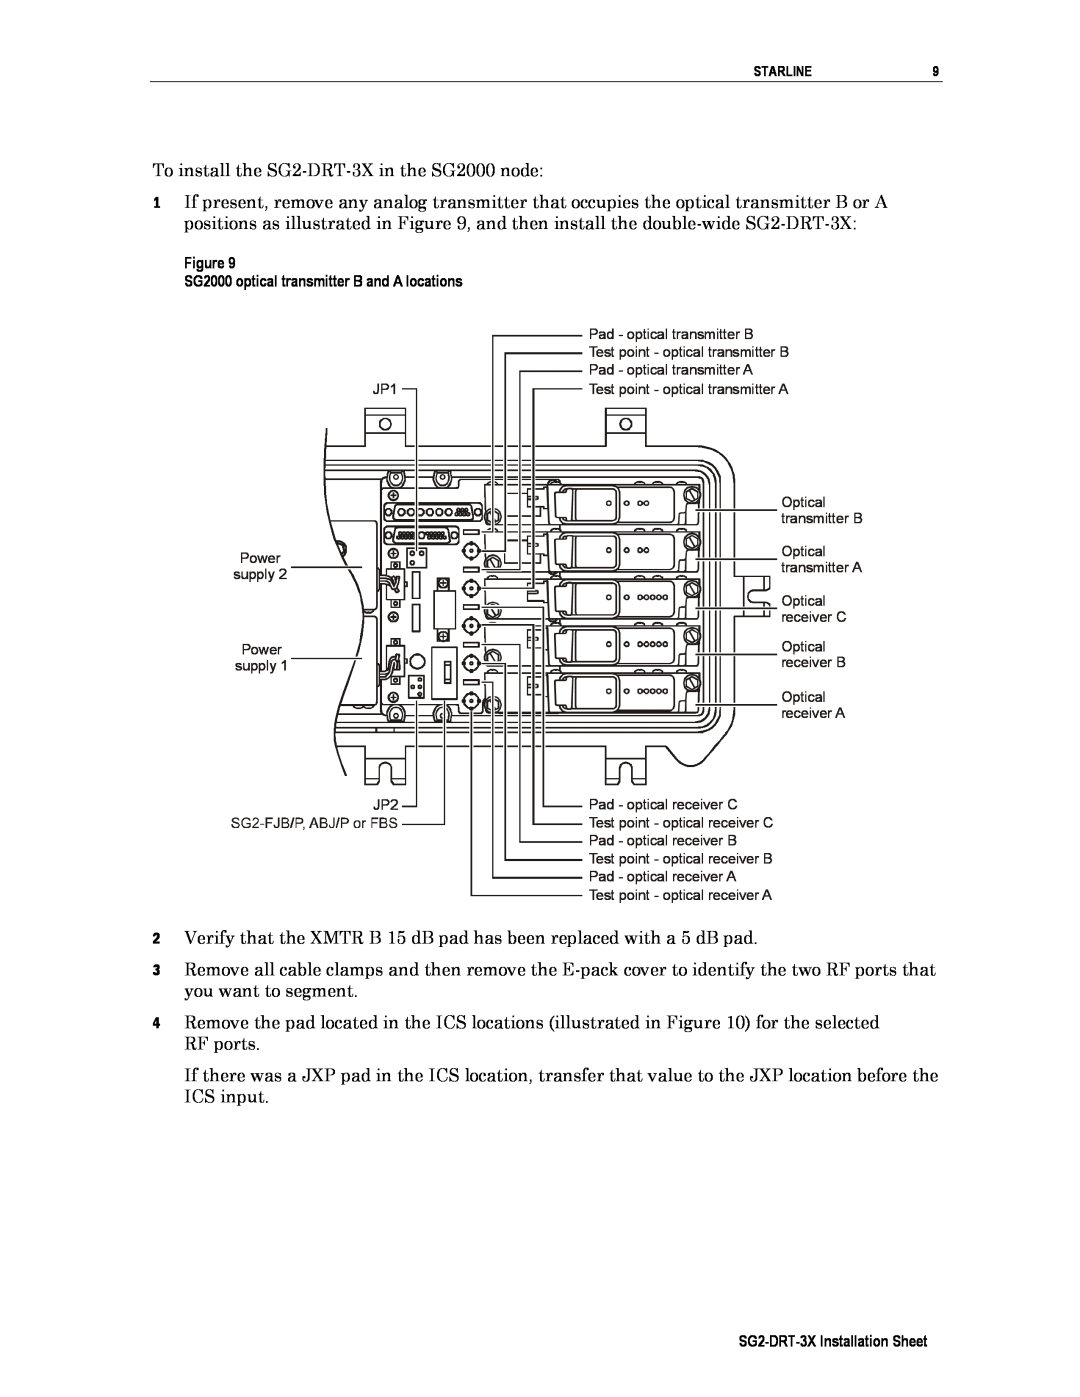 Cuisinart operation manual To install the SG2-DRT-3Xin the SG2000 node 